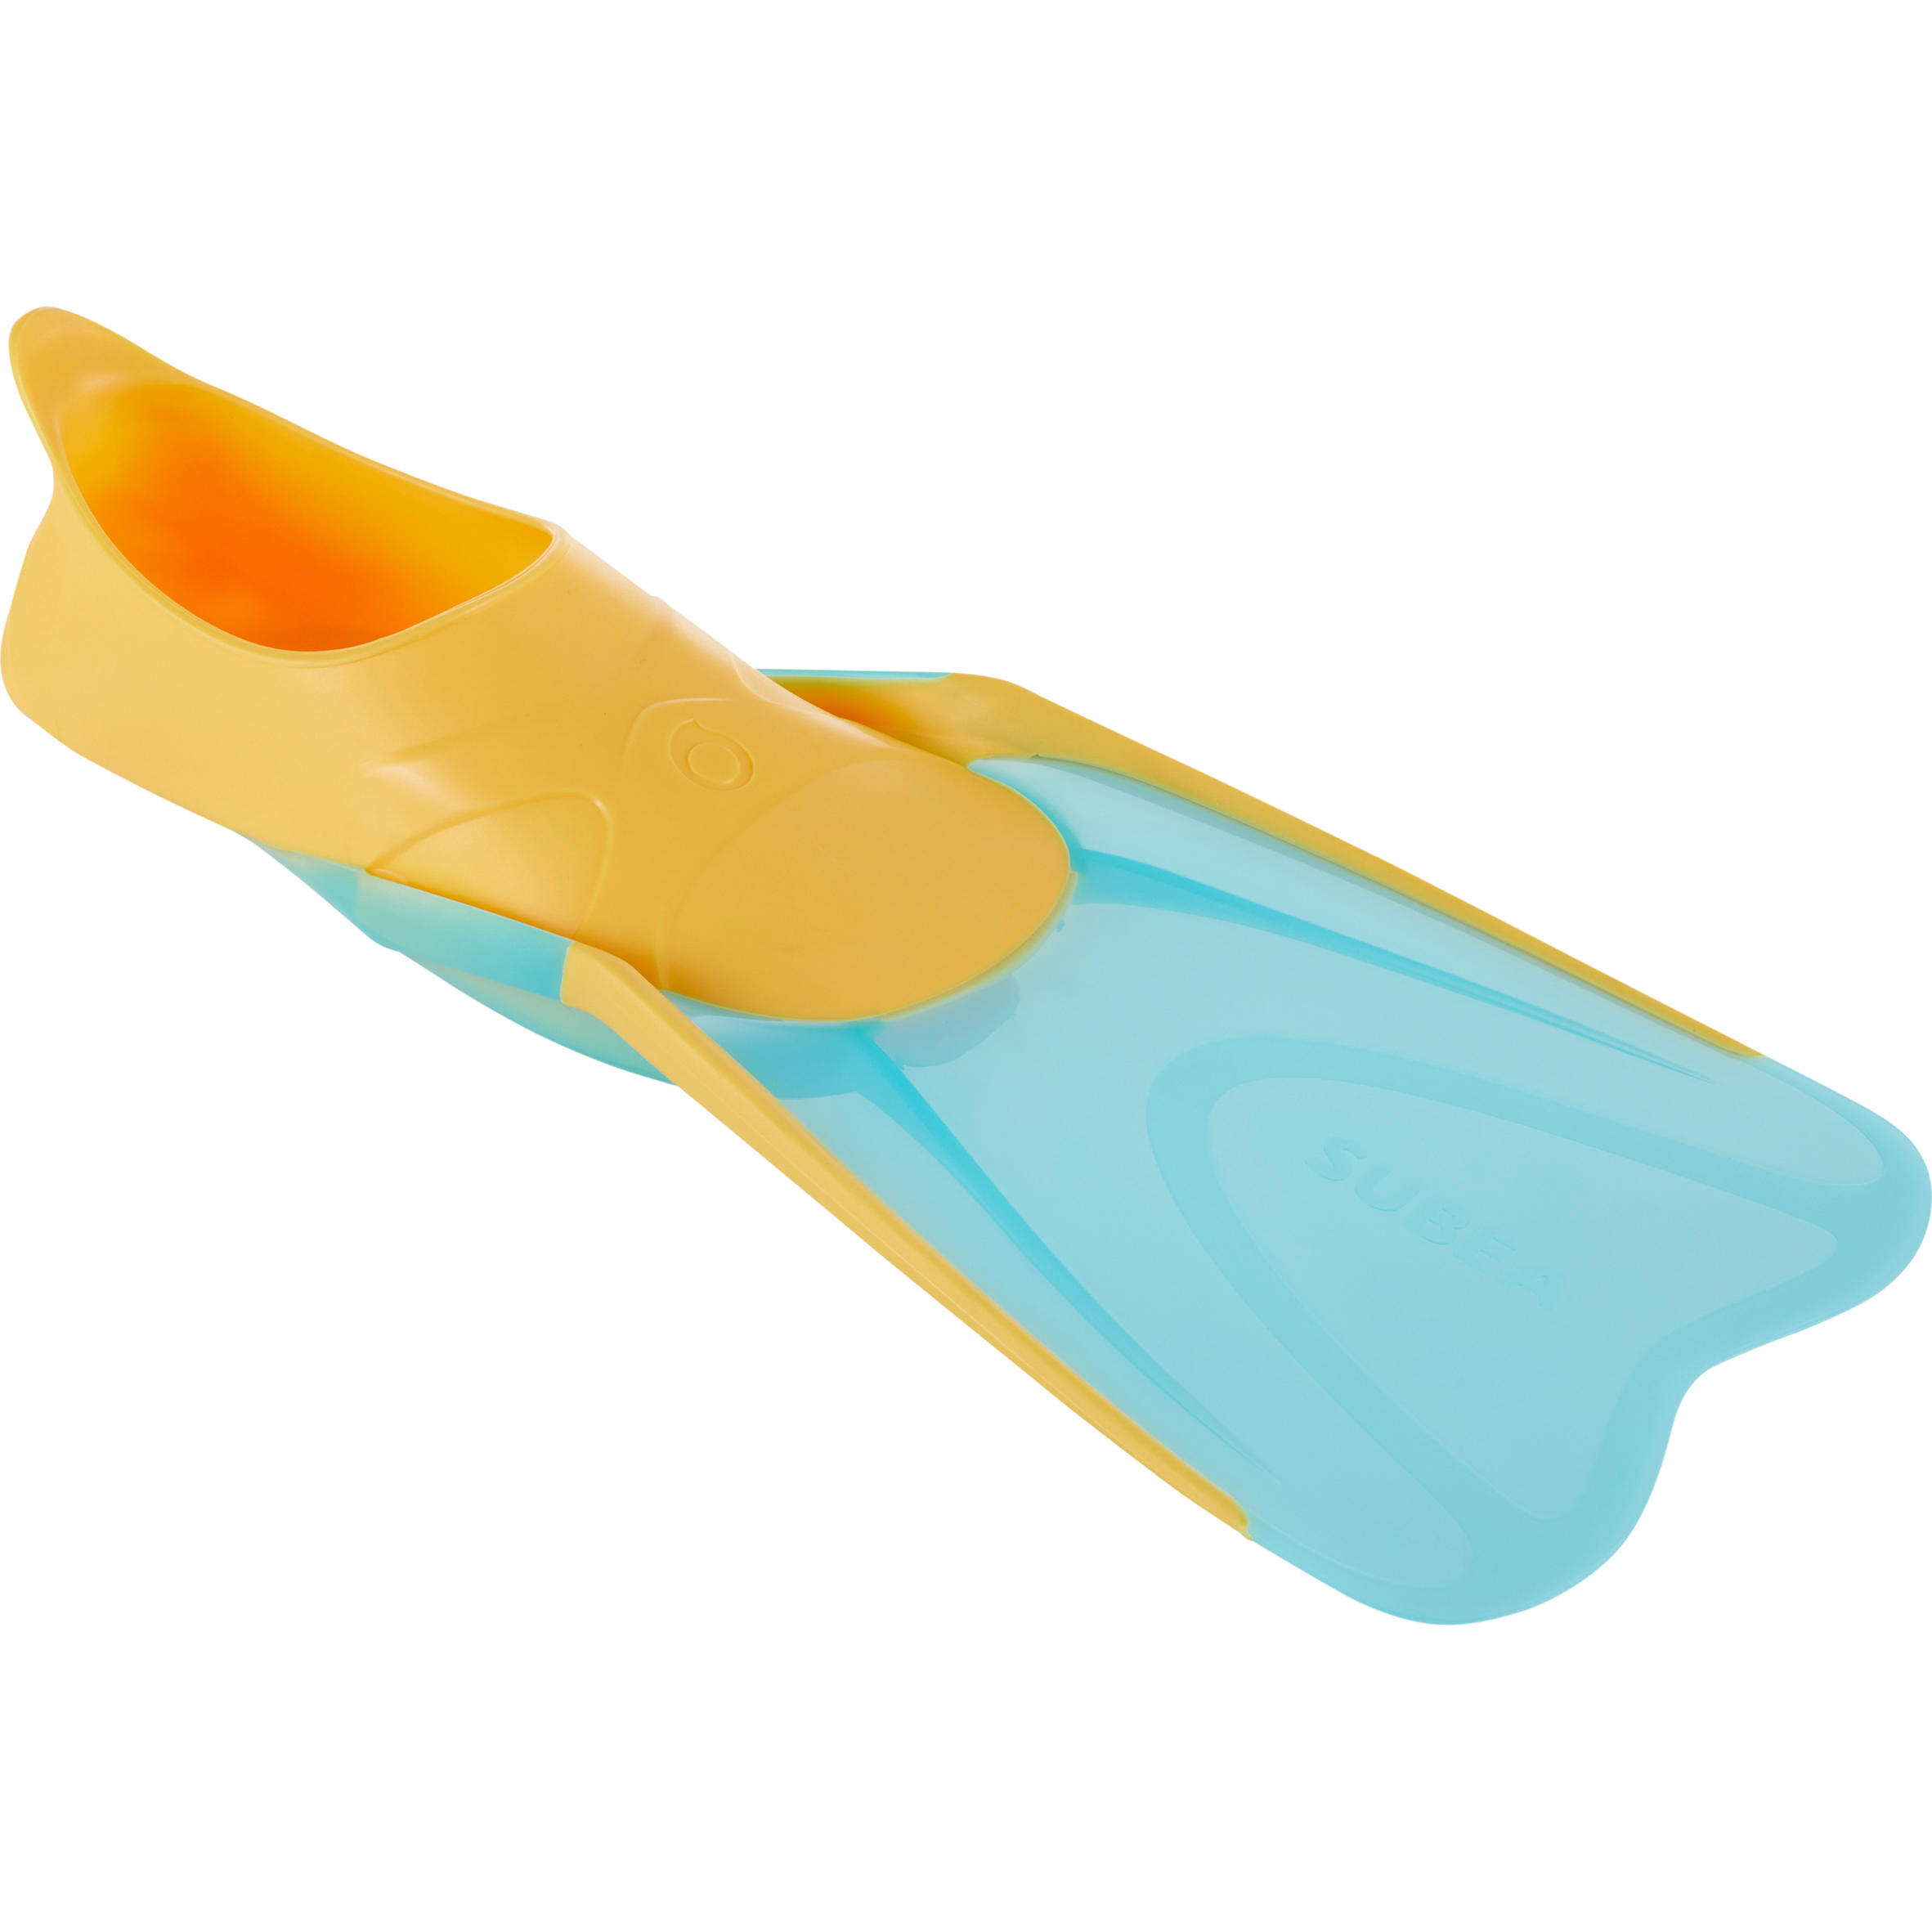 SUBEA Kids' Diving Fins - FF 100 Soft Orange and Turquoise